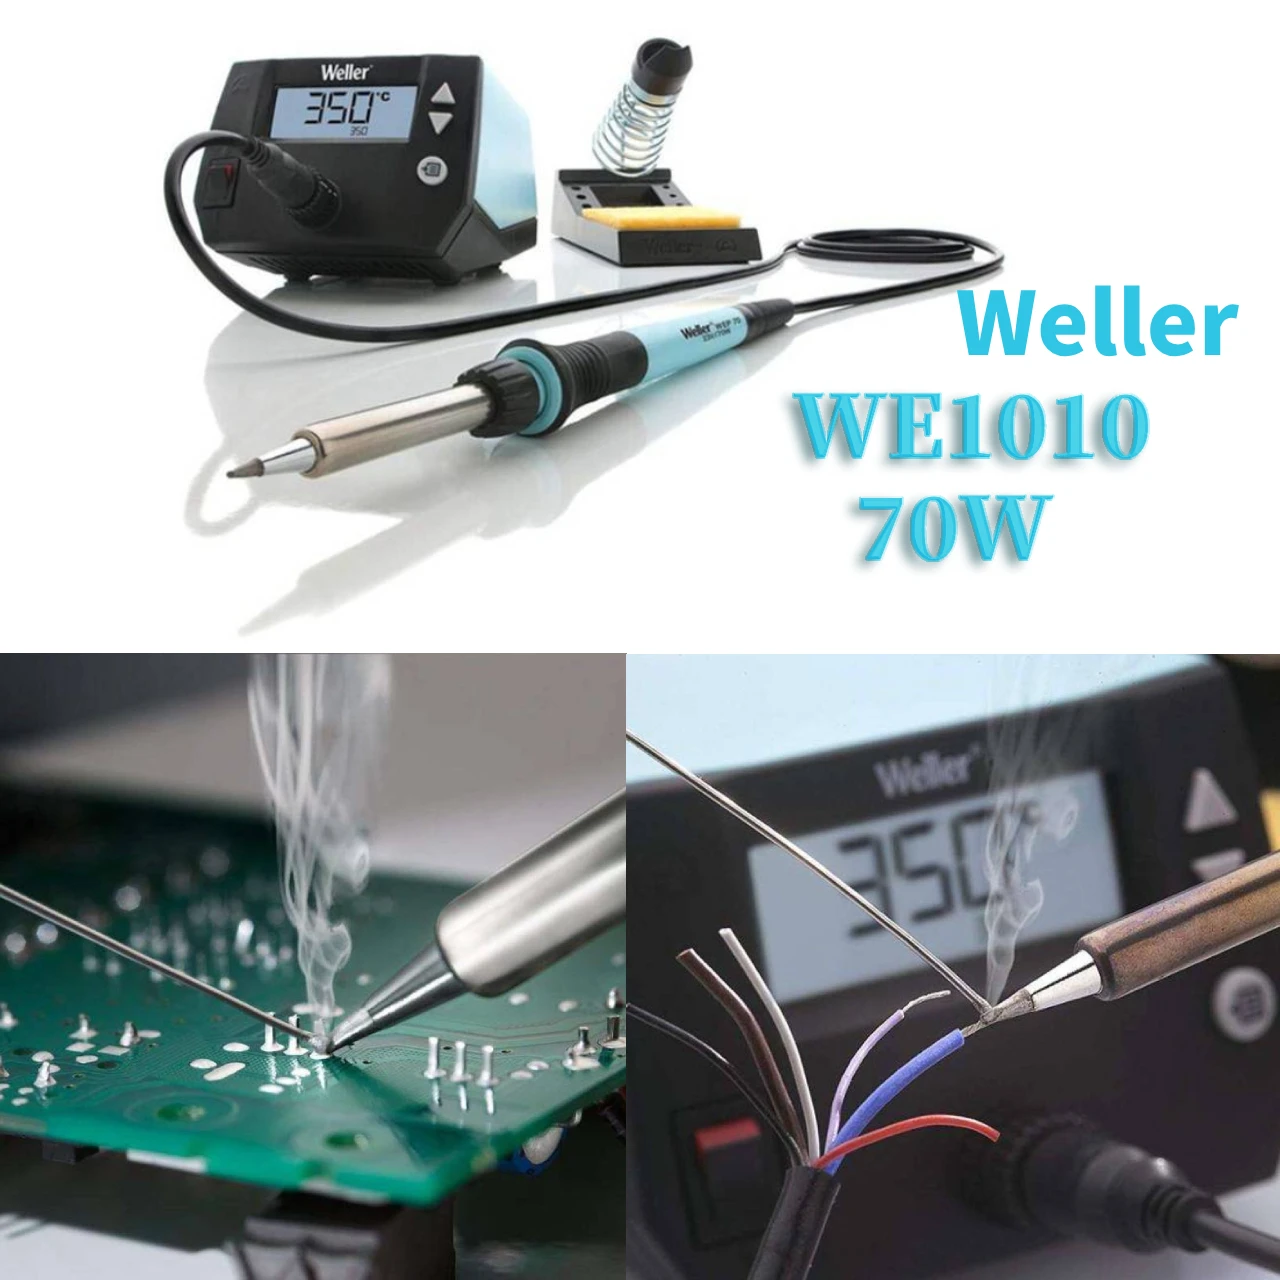 

Weller Original WE1010 70W Professional Soldering Station Electronic Lead-free Welding Station Tools For Repair Cell Phones